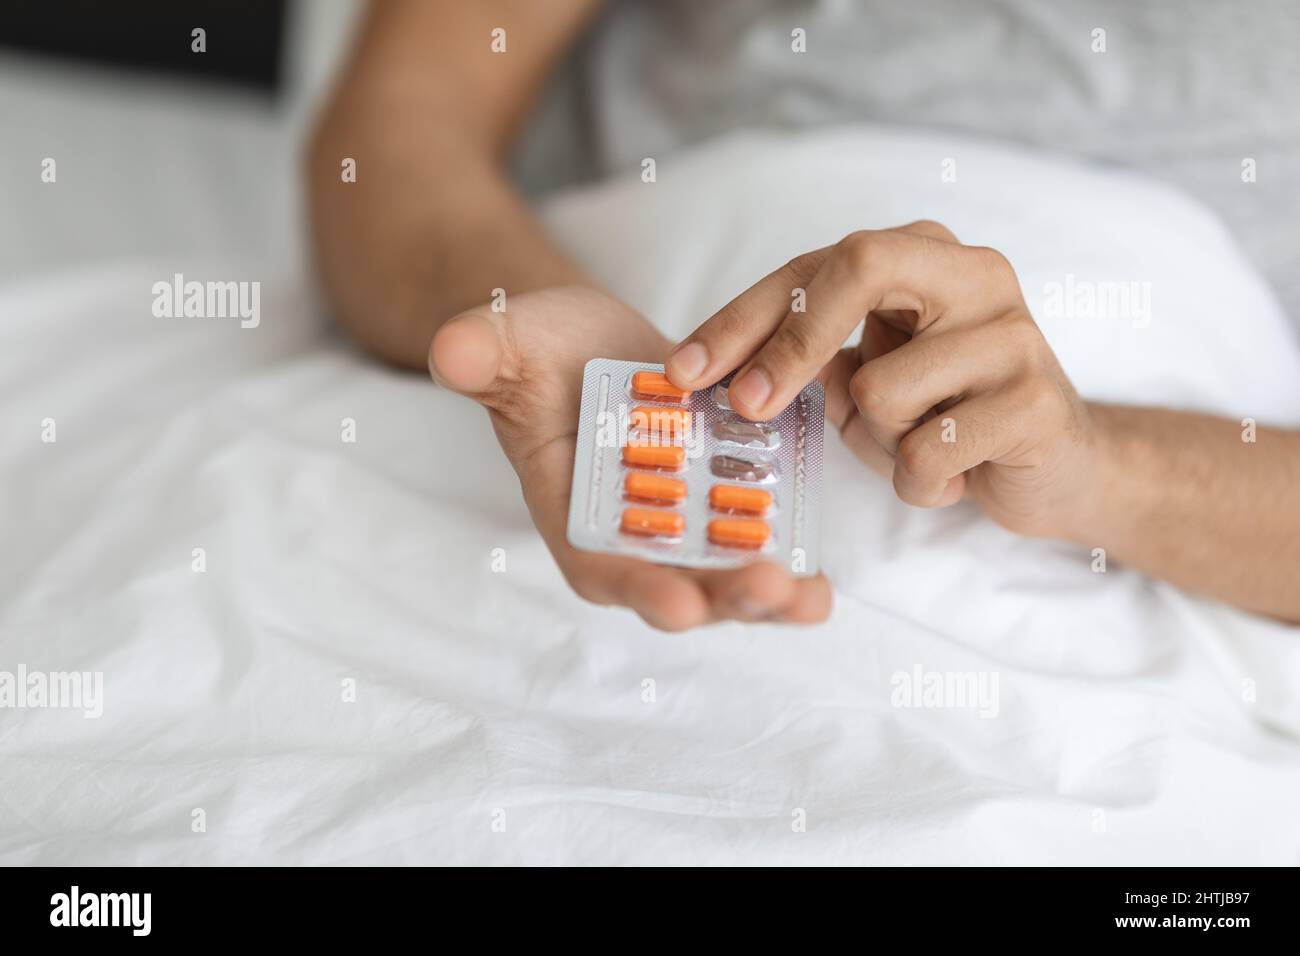 Sick Man Holding Blister Pack With Pills, Taking Medicine At Home Stock Photo